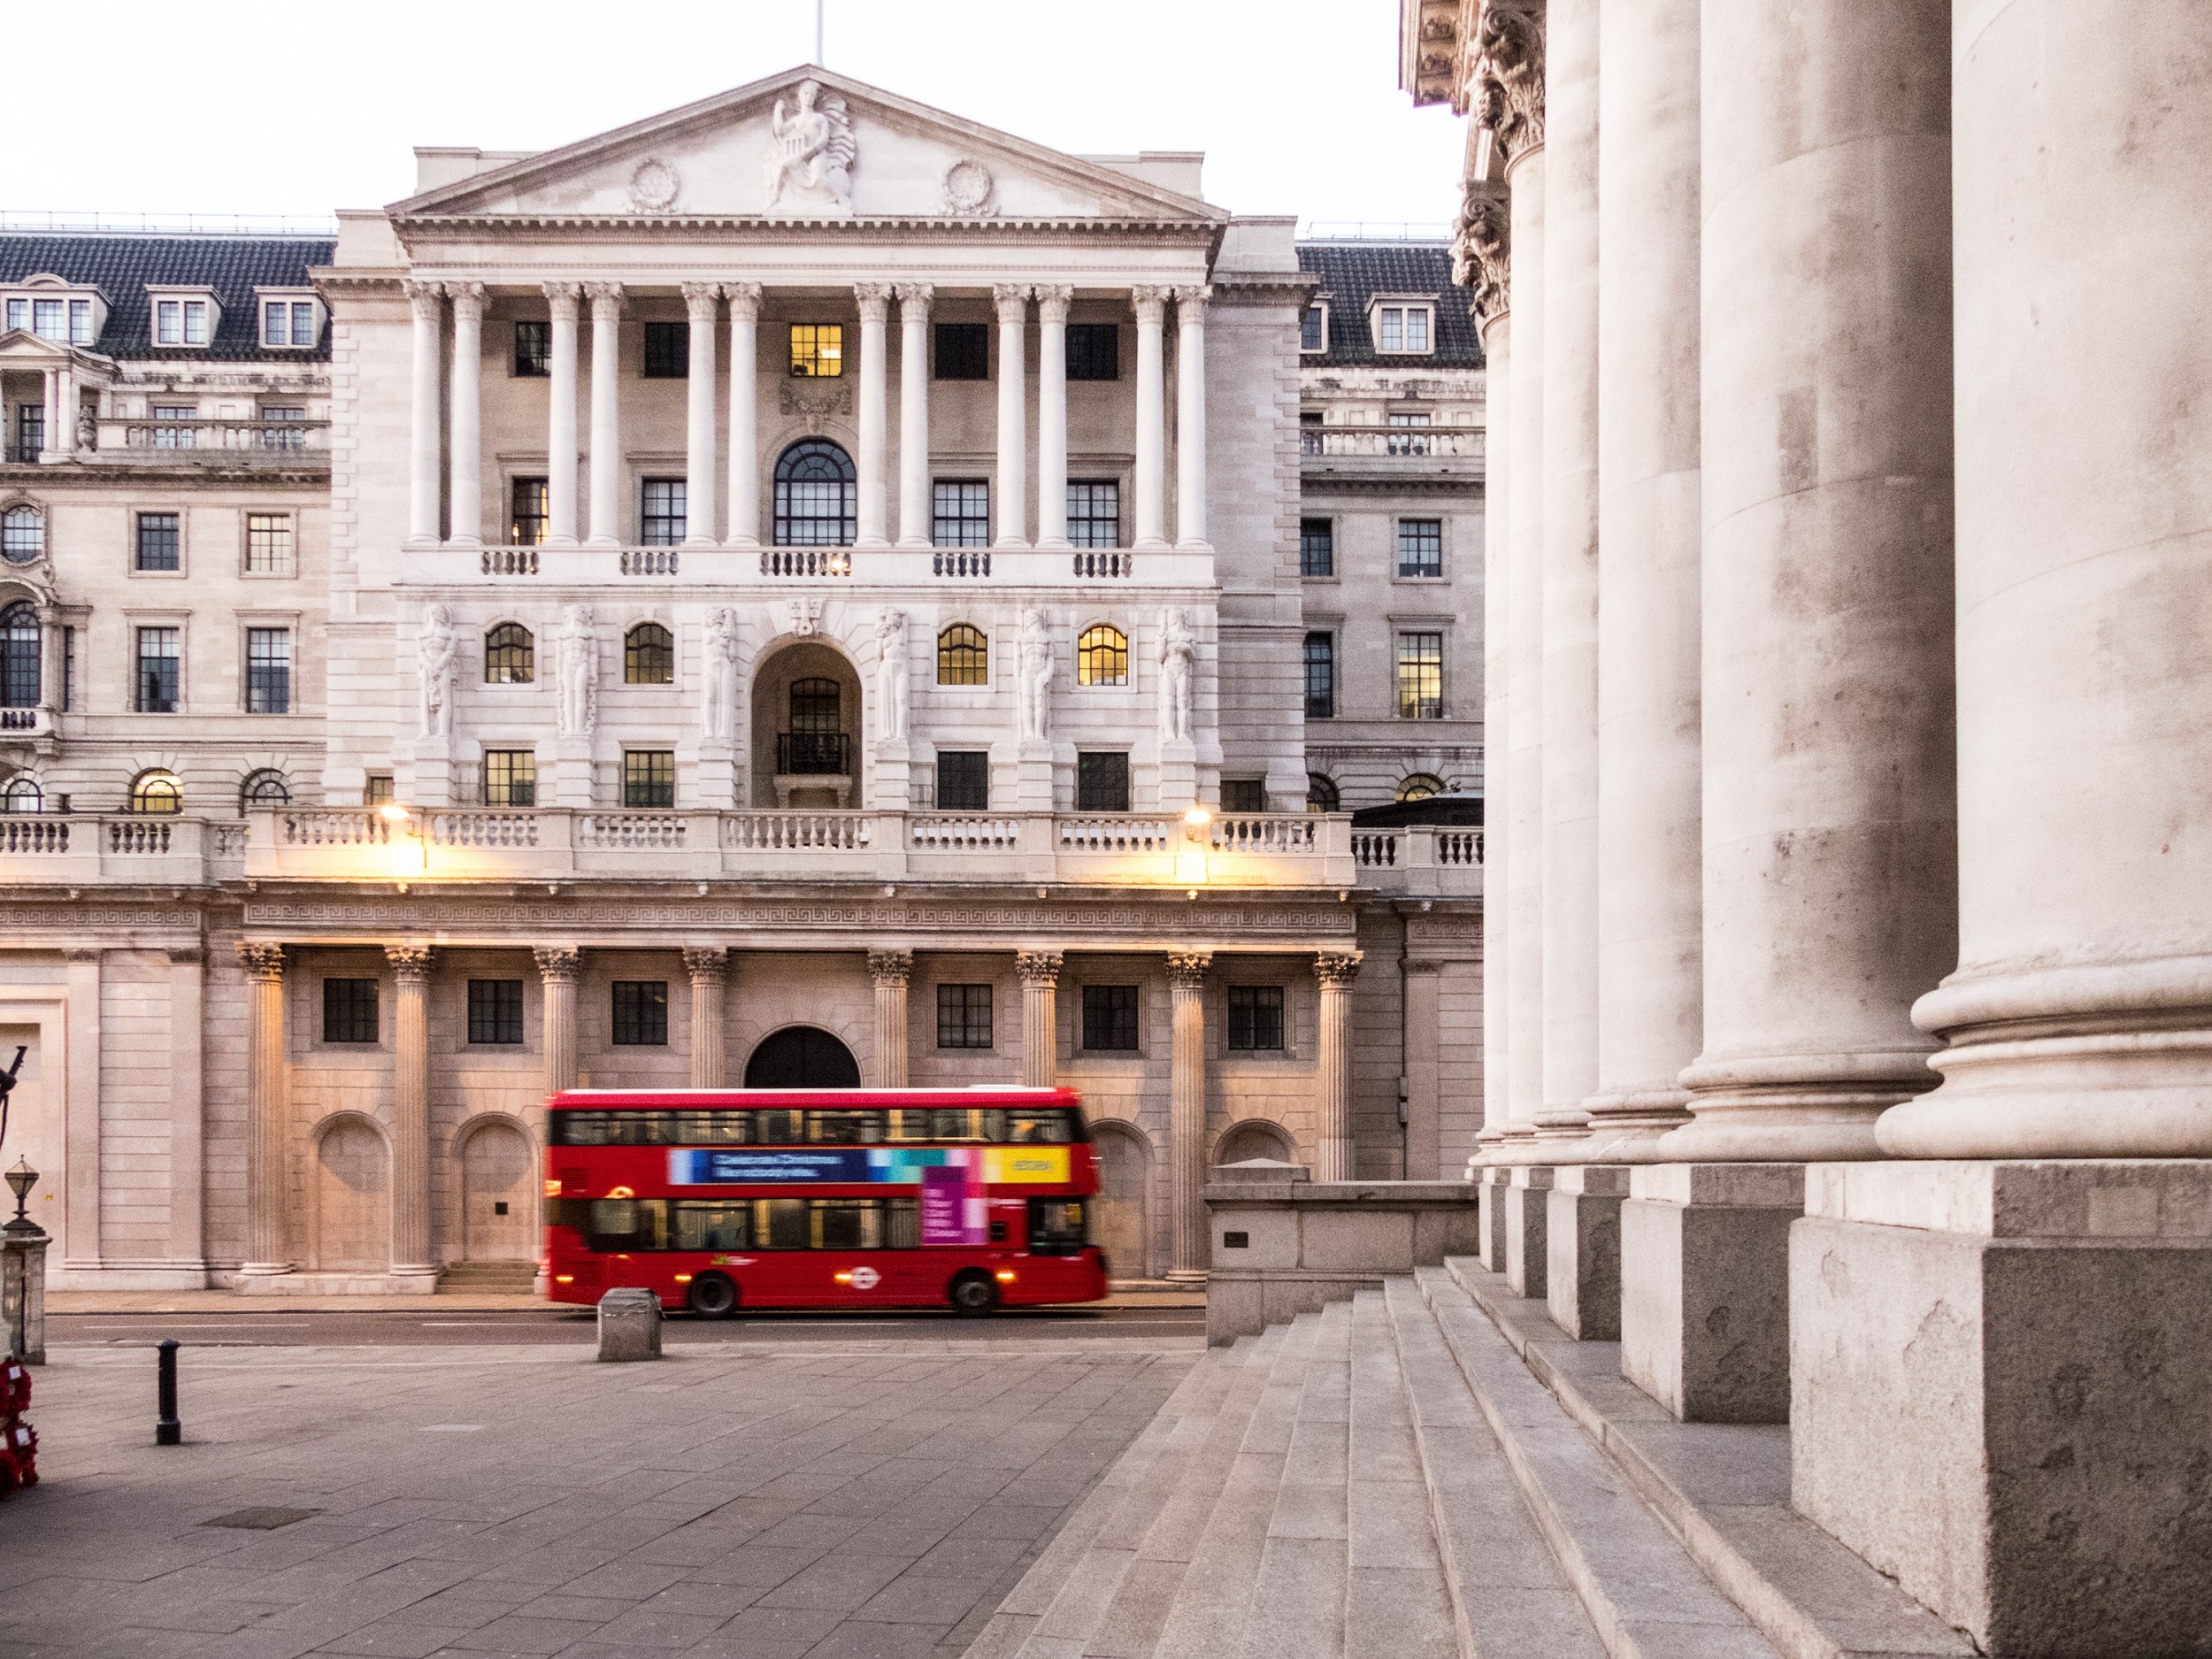 A red double decker bus is pictured in front of the Bank of England building in central London.